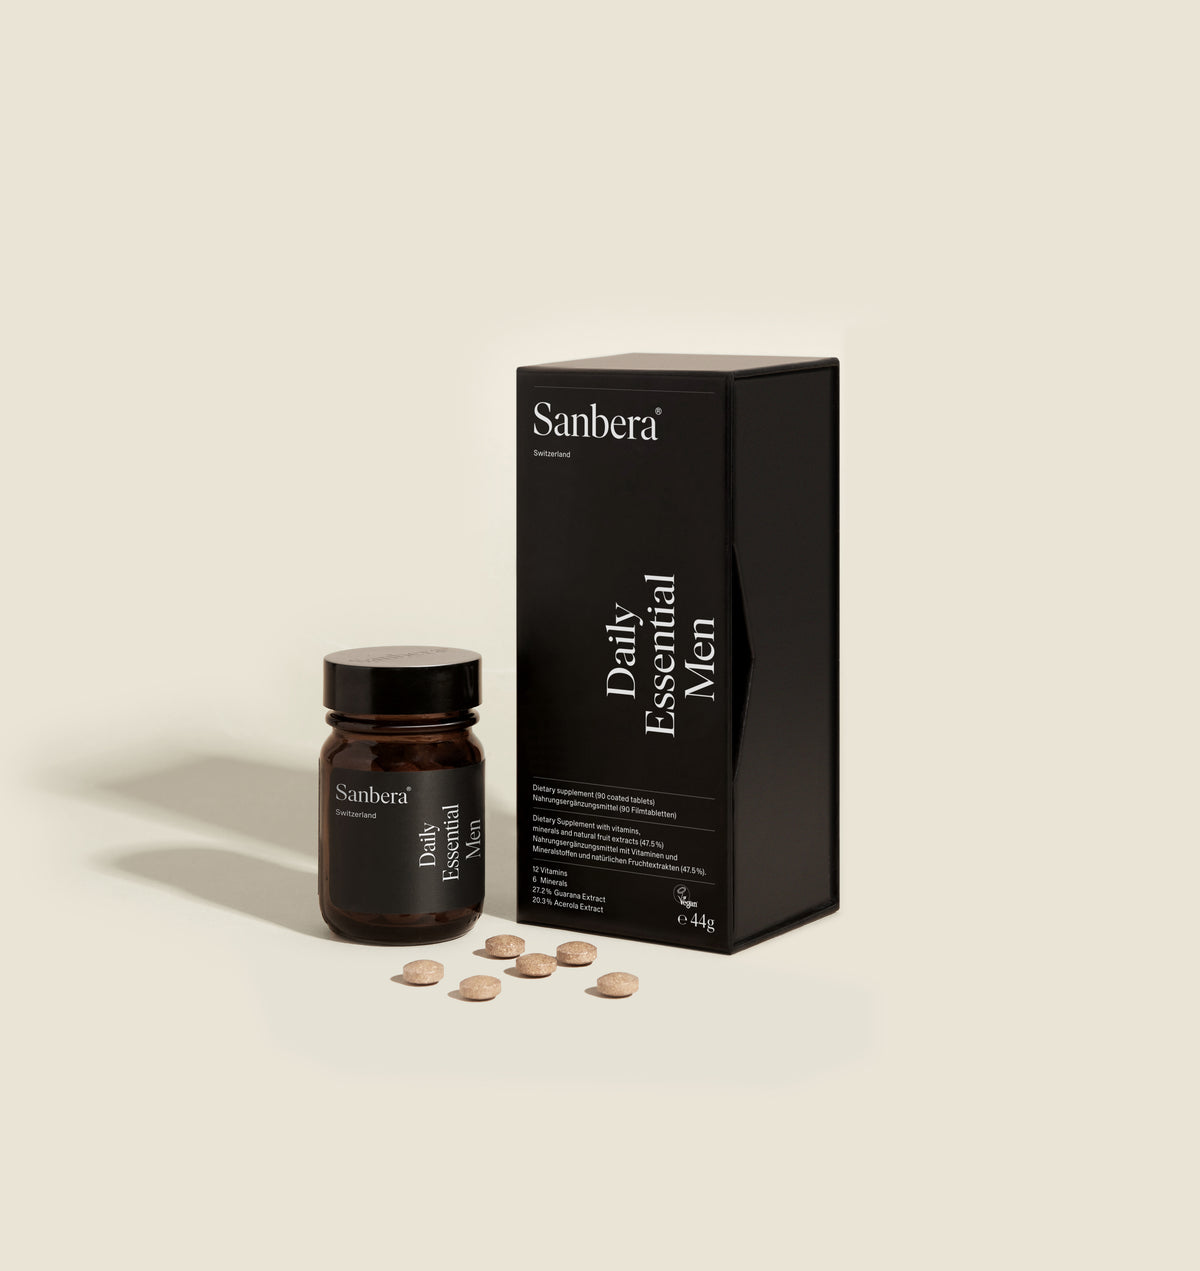 Sanbera Daily Essential Men Supplements for his overall health